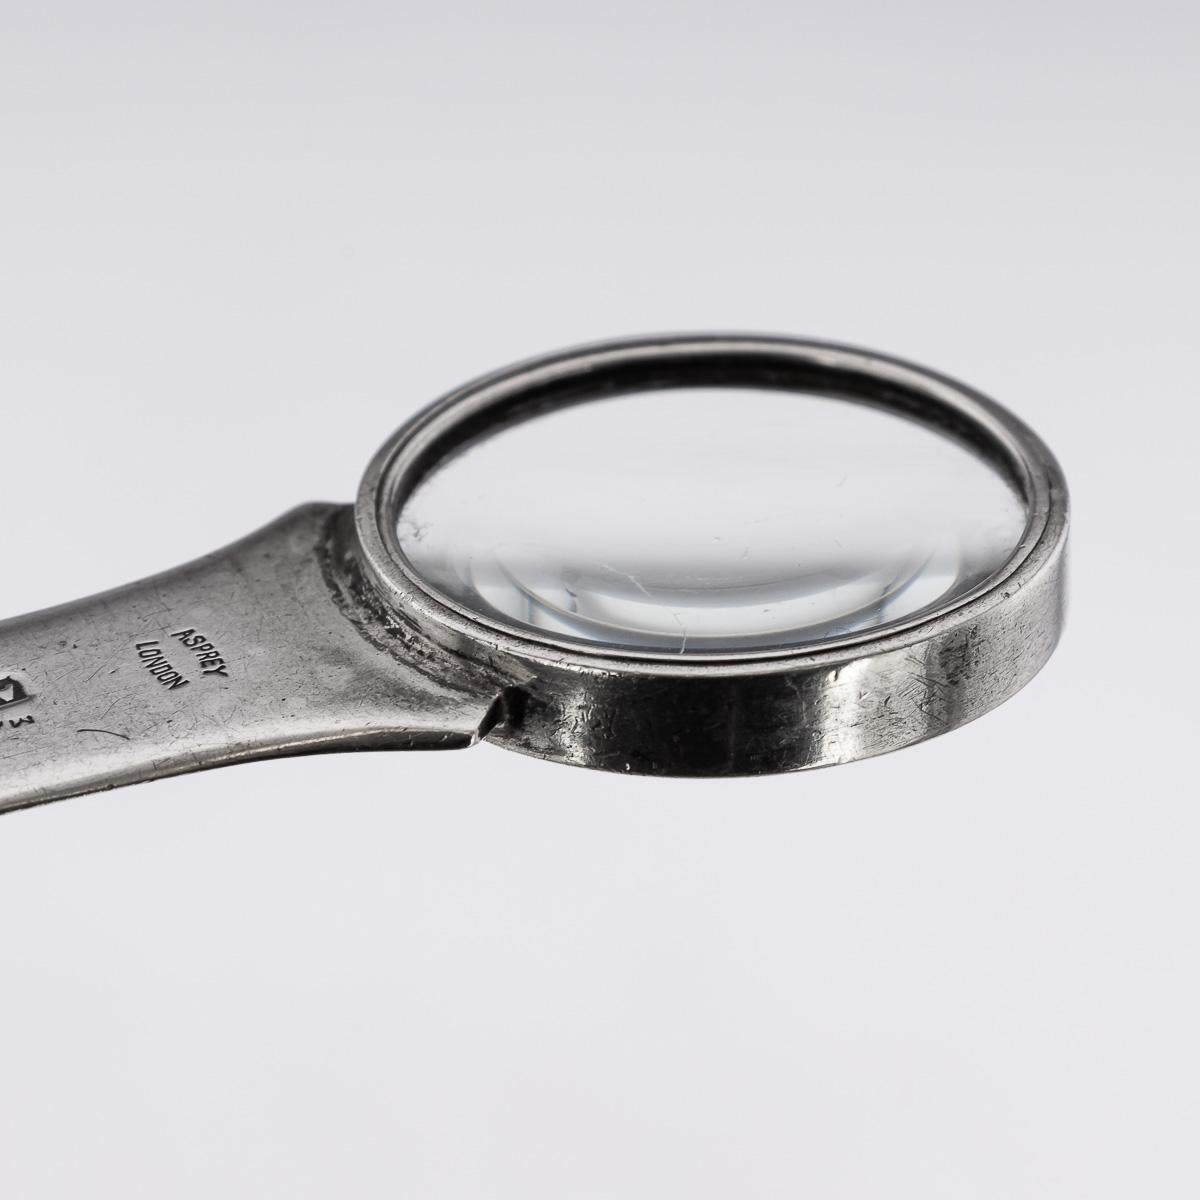 20th Century British Solid Silver Magnifying Glass & Ruler, Asprey, c.1929 For Sale 6